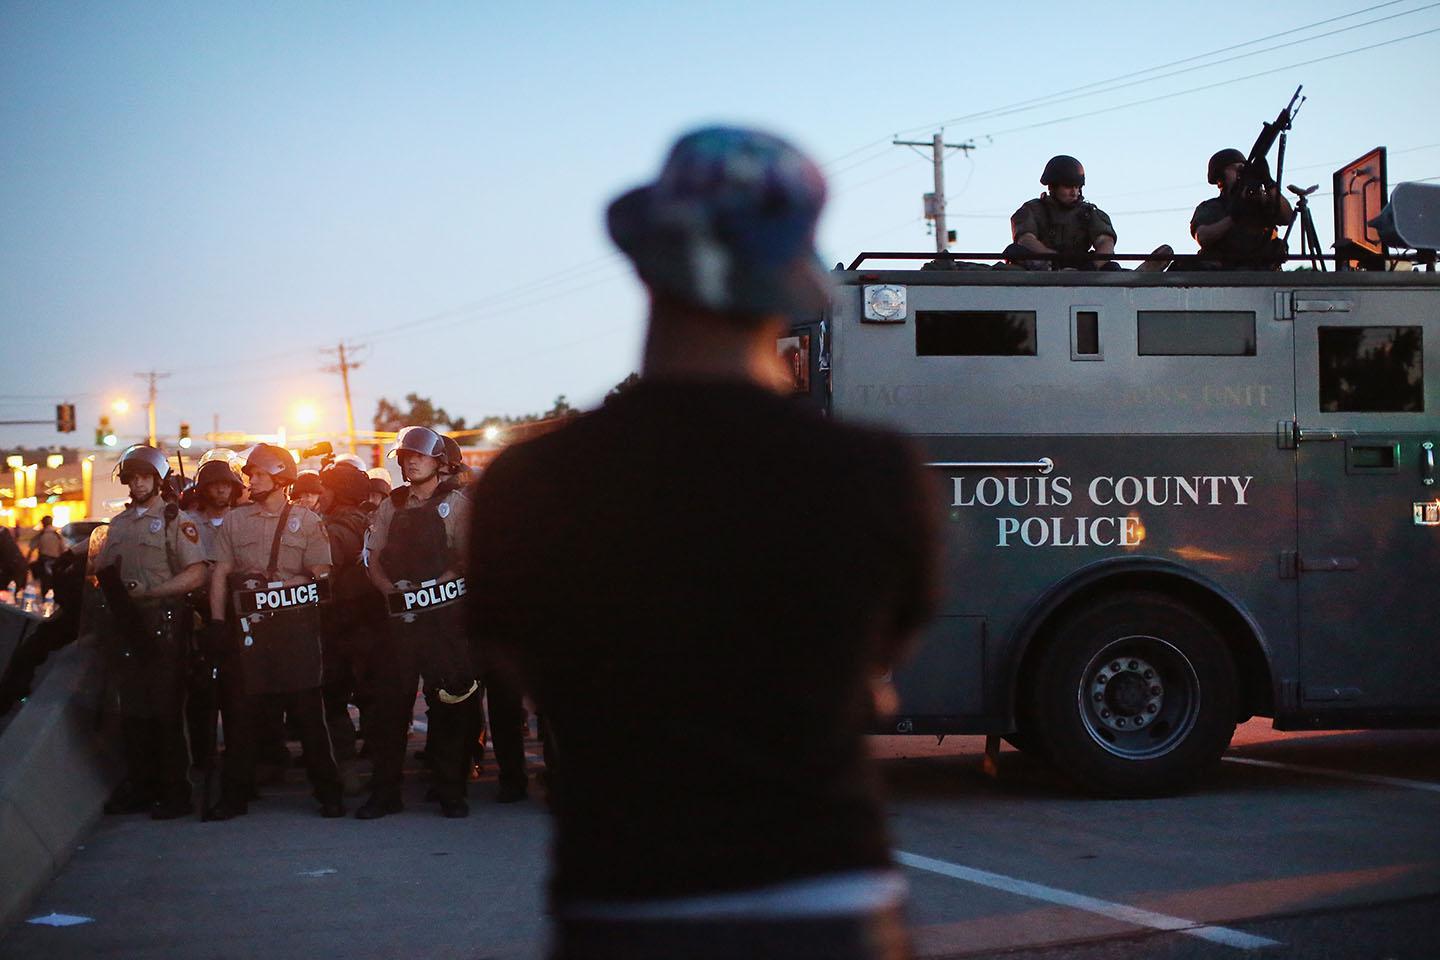 Police stand watch as demonstrators protest the shooting death of teenager Michael Brown on August 13, 2014 in Ferguson, Missouri. 